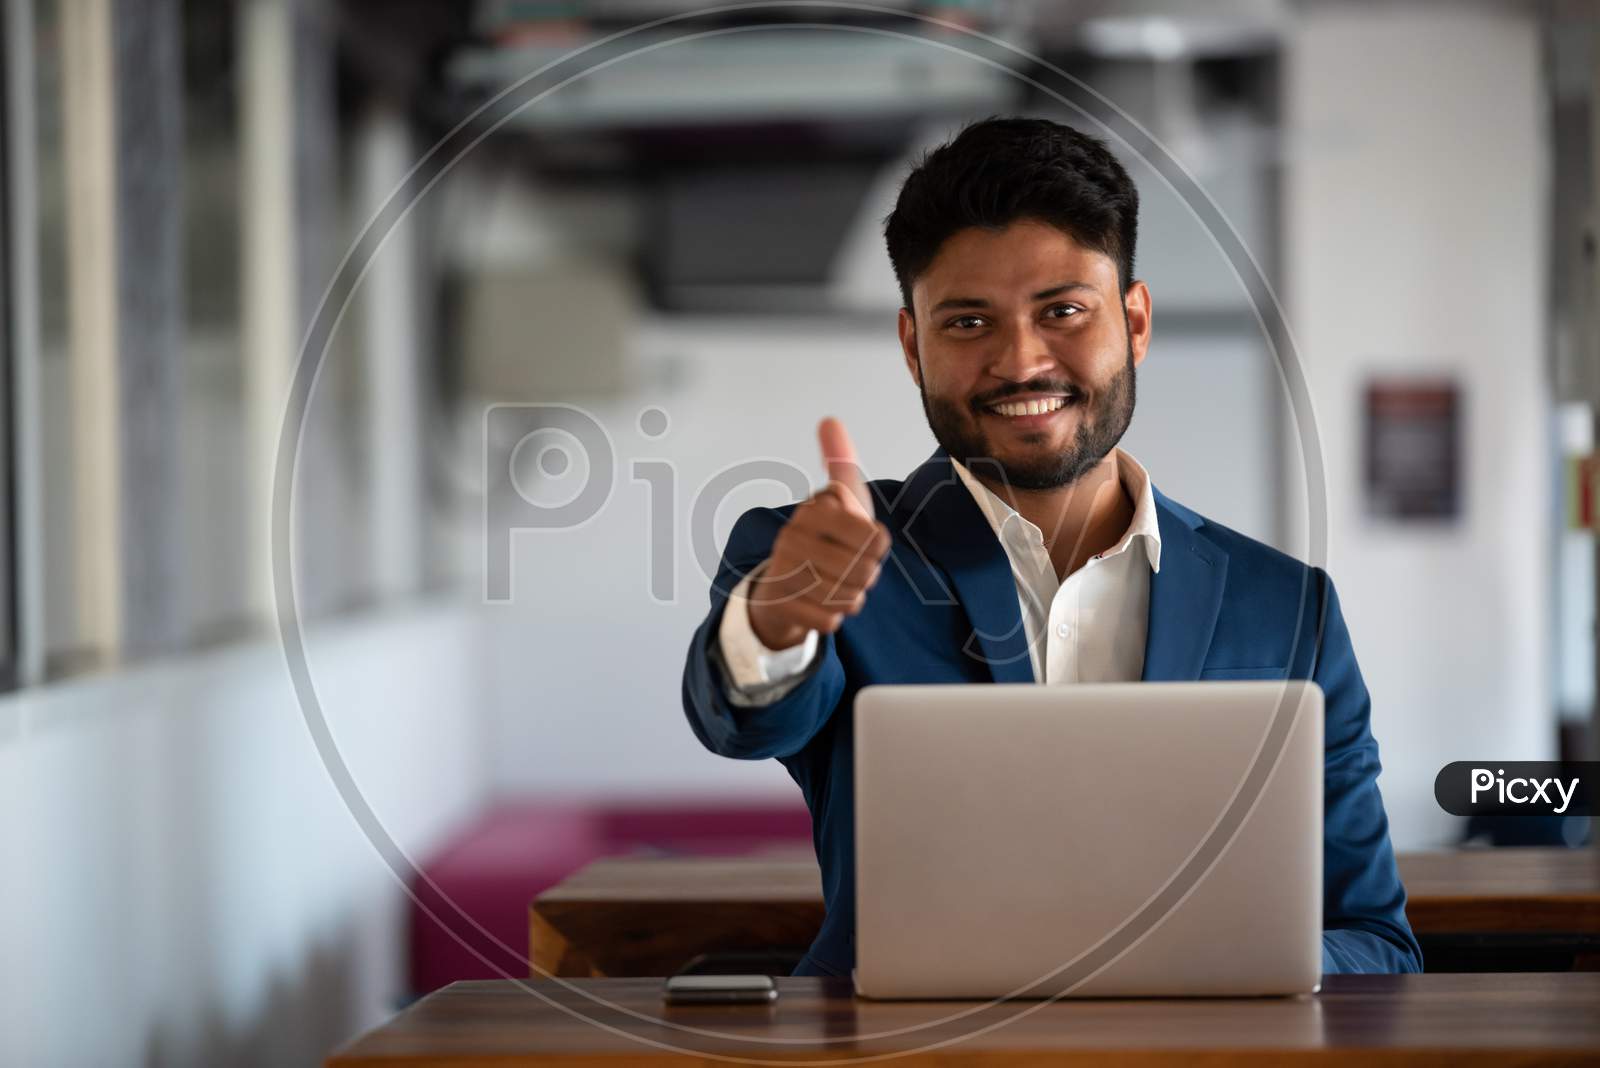 Indian Successful  Businessman With Smile Face Using  Laptop at an Office